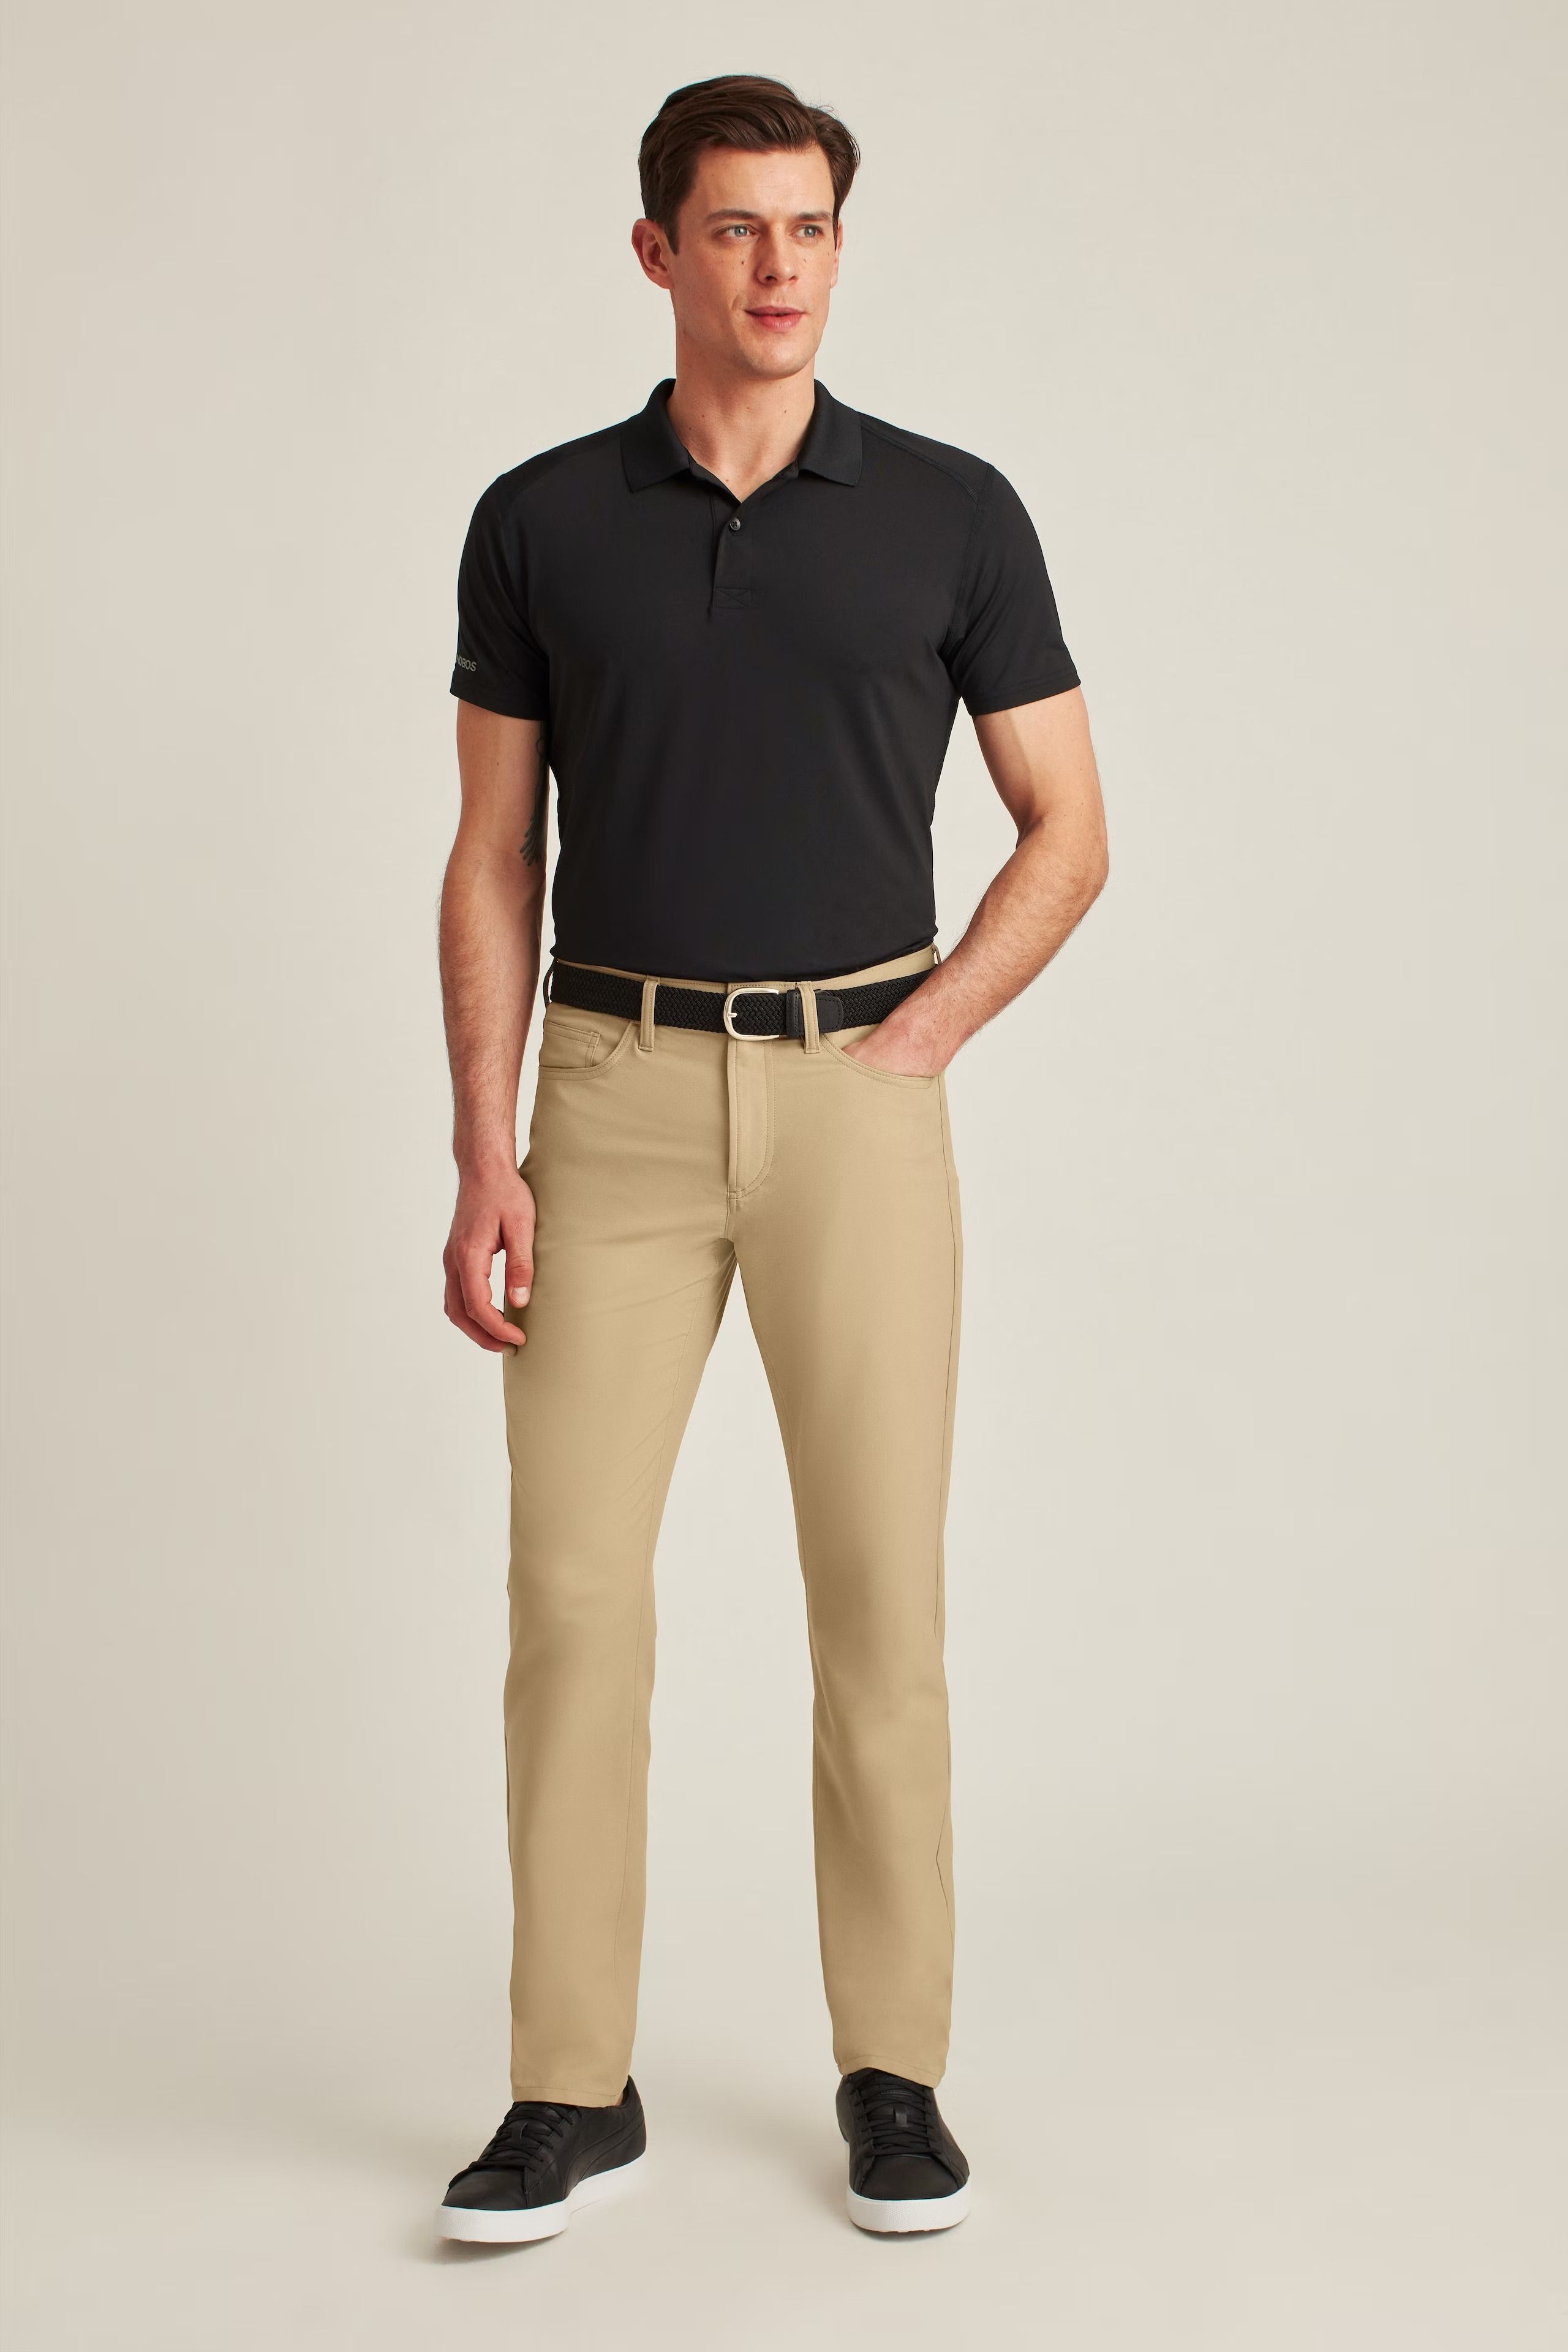 12 Best Mens Stretch Pants For Everyday Comfort In 2023  FashionBeans